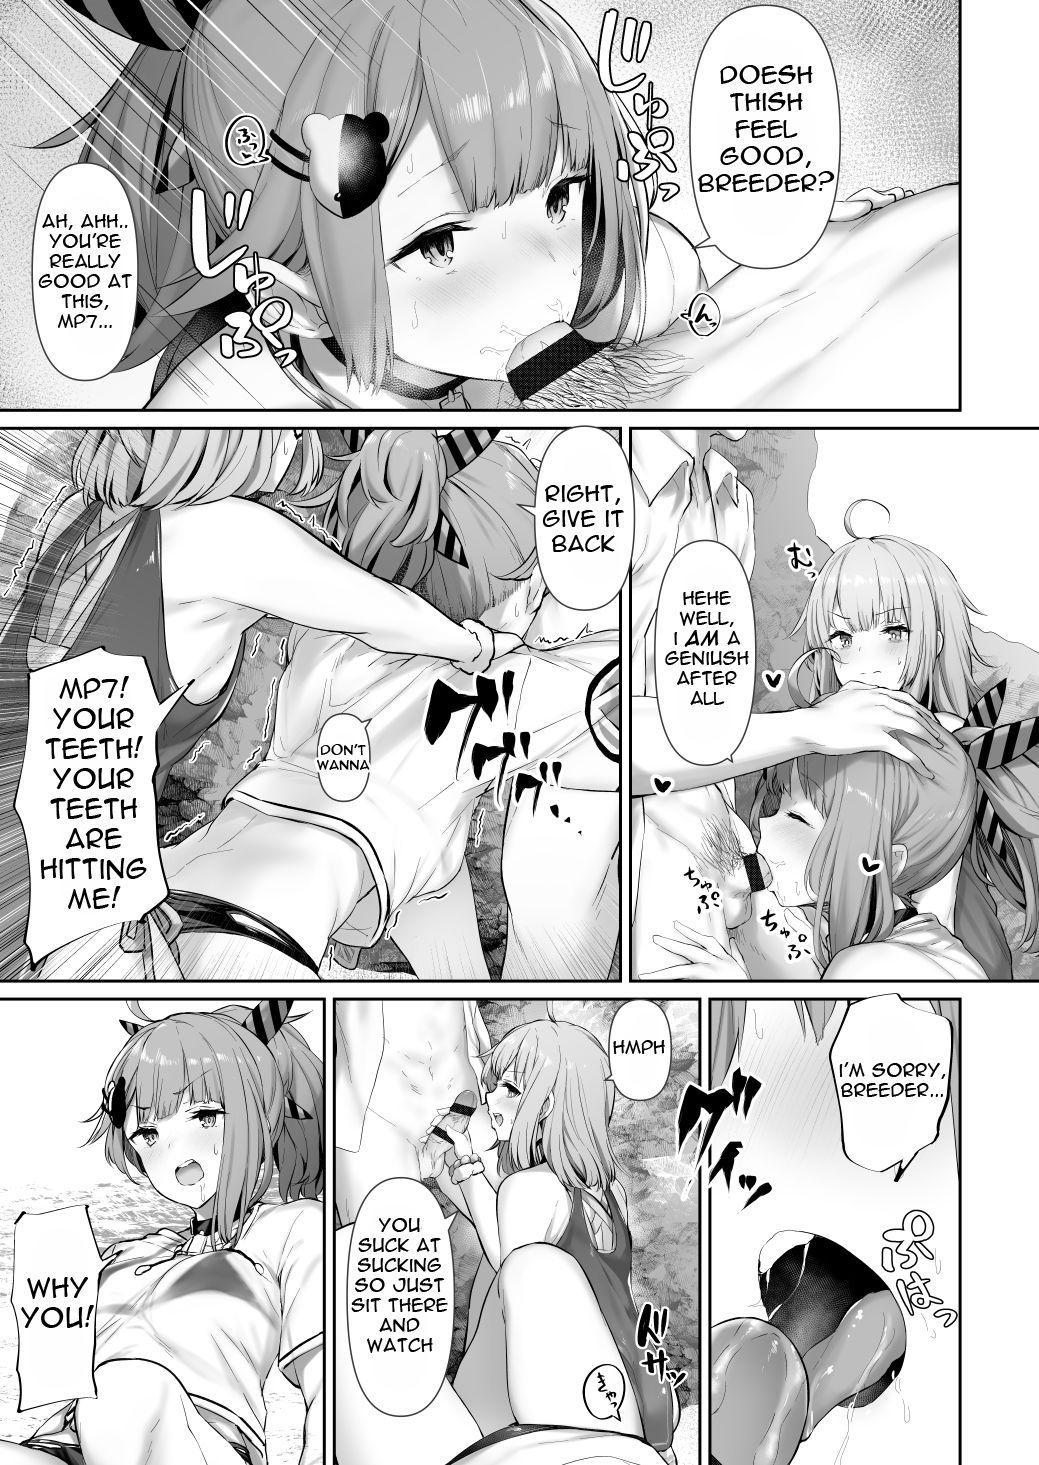 Body Massage MP7 and AA-12 no - Girls frontline Dando - Page 3